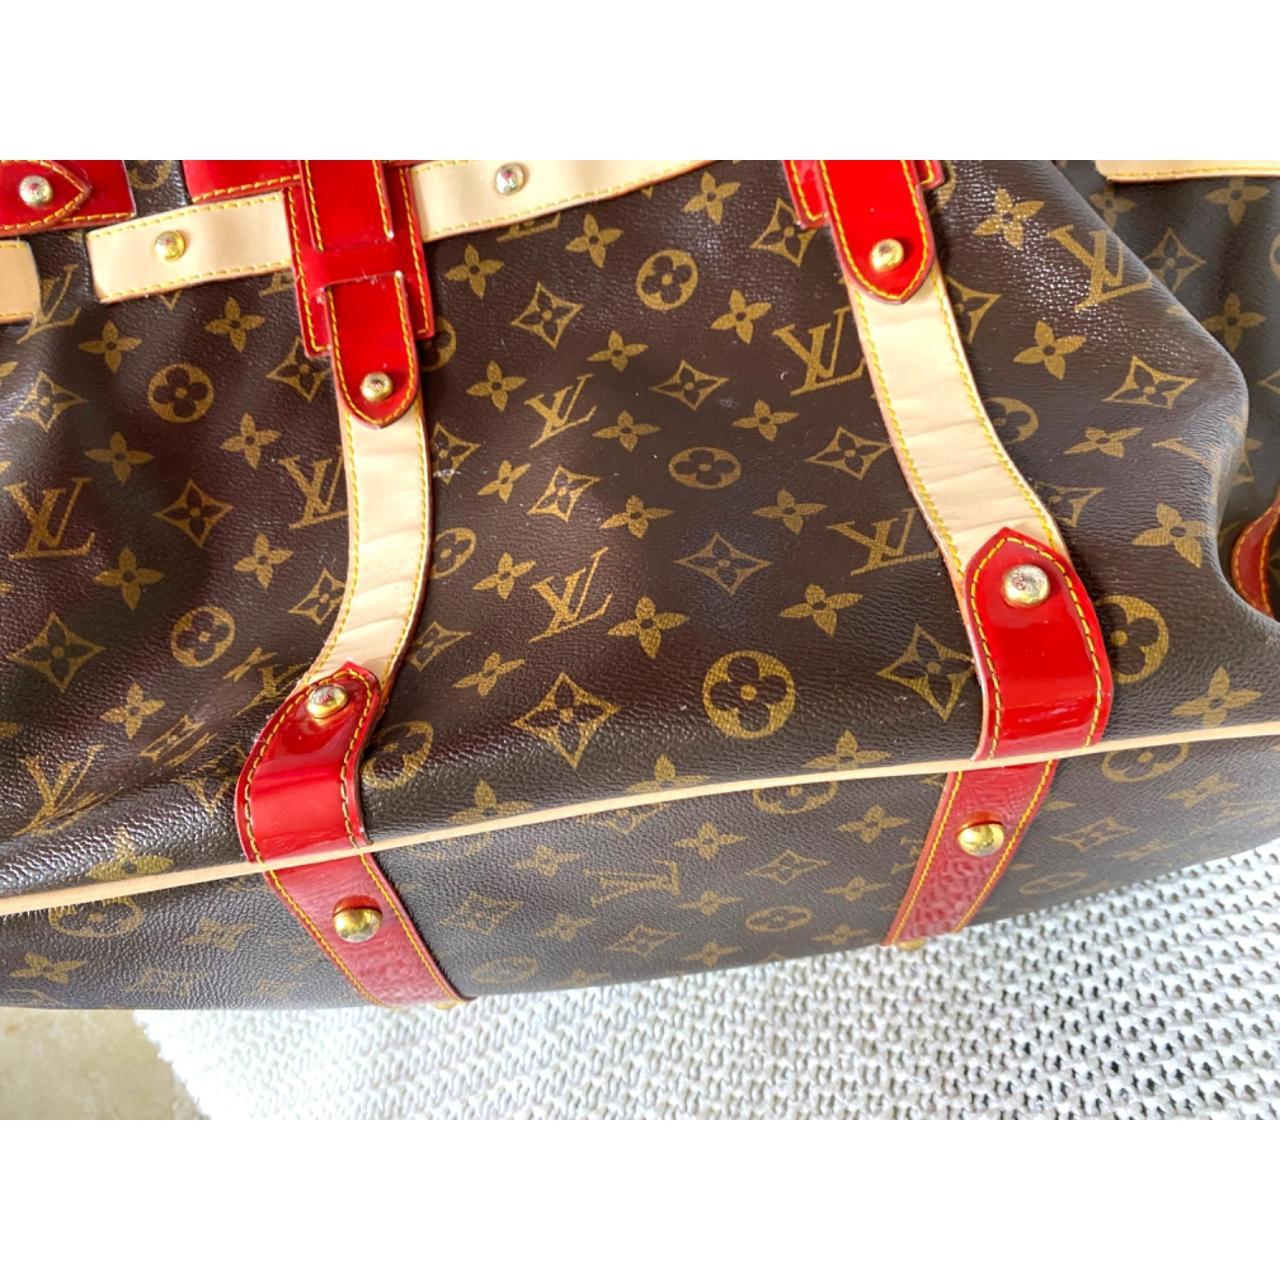 Louis Vuitton Limited Edition Monogram Canvas Rubis Salina Gm in Red